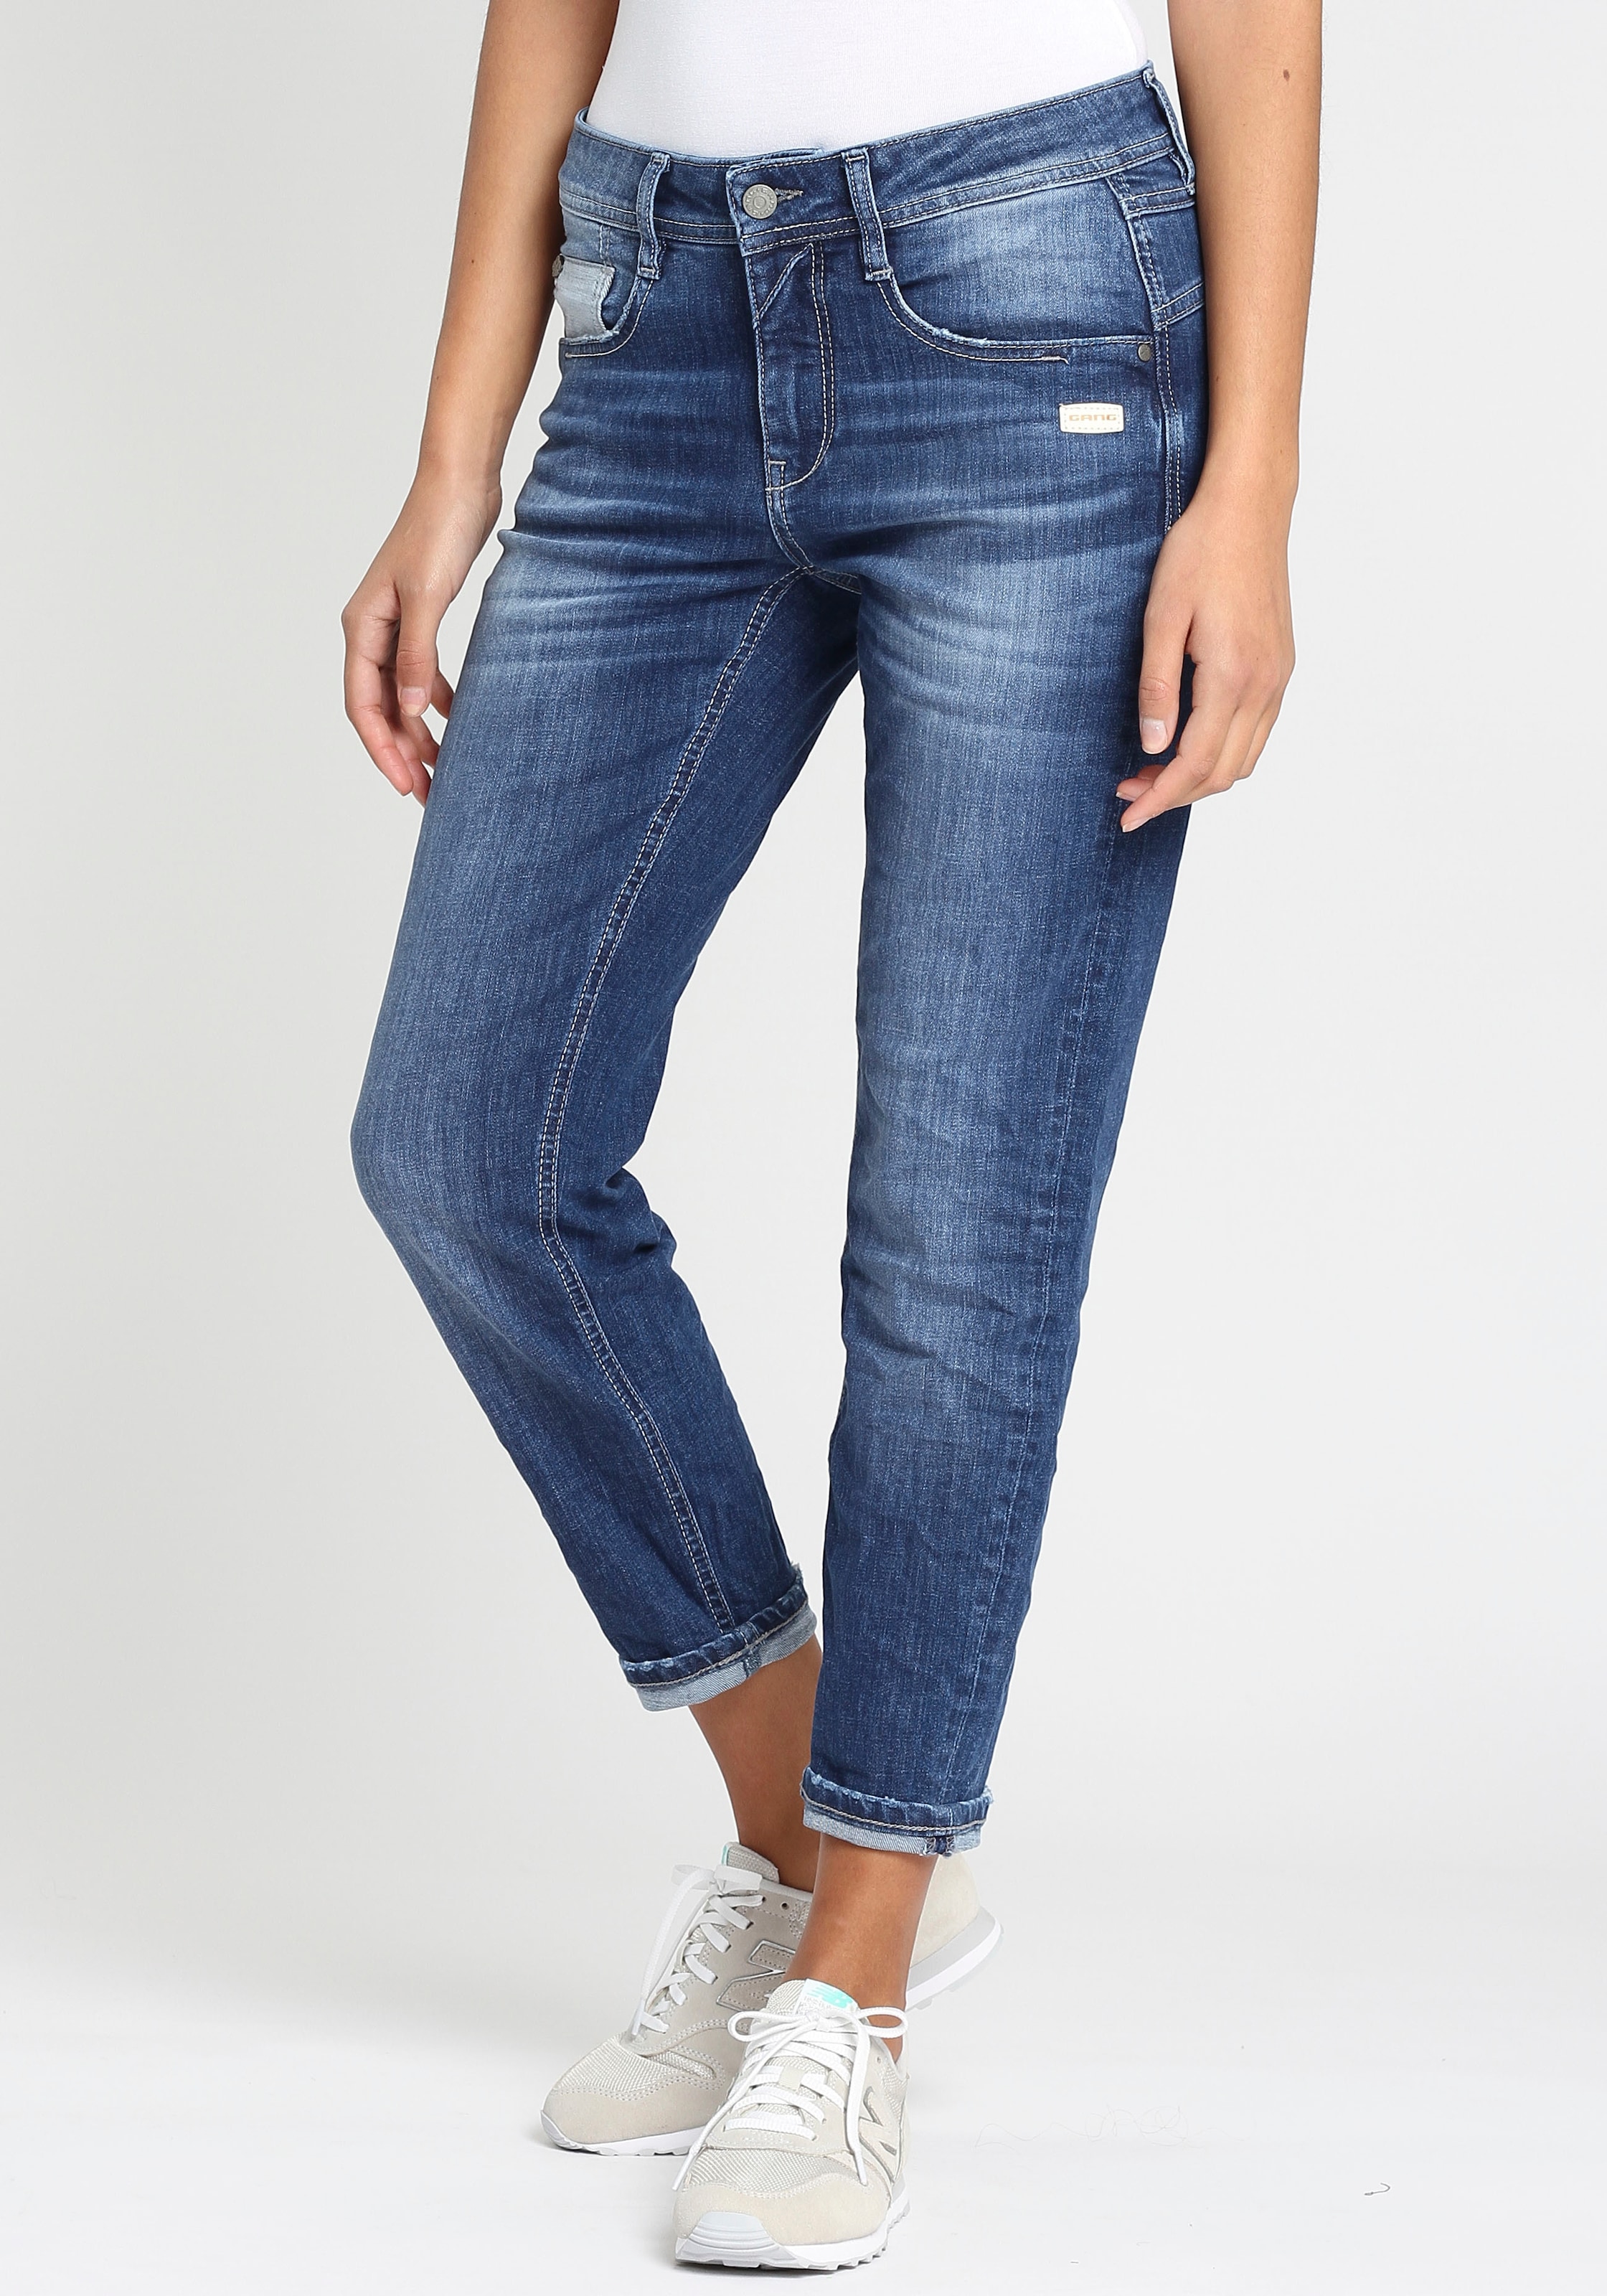 GANG Relax-fit-Jeans BAUR kaufen »94AMELIE | CROPPED«